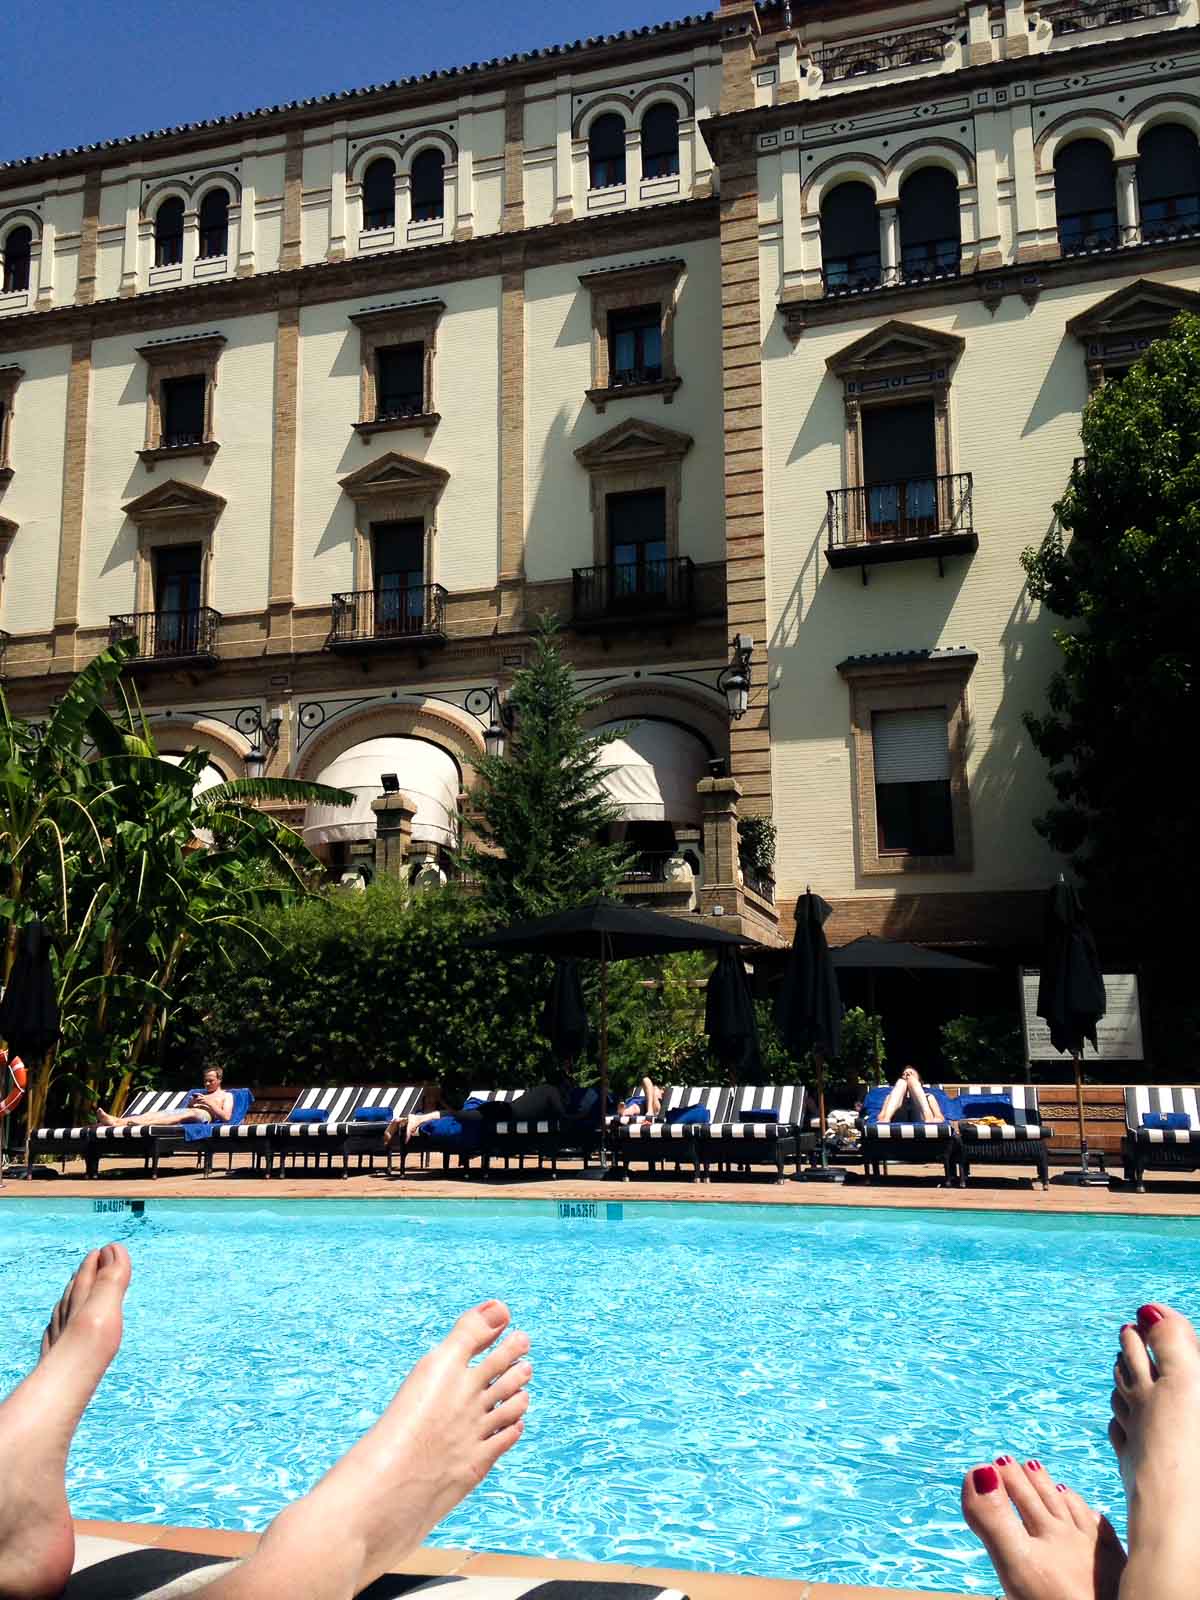 Poolside at Hotel Alfonso XII